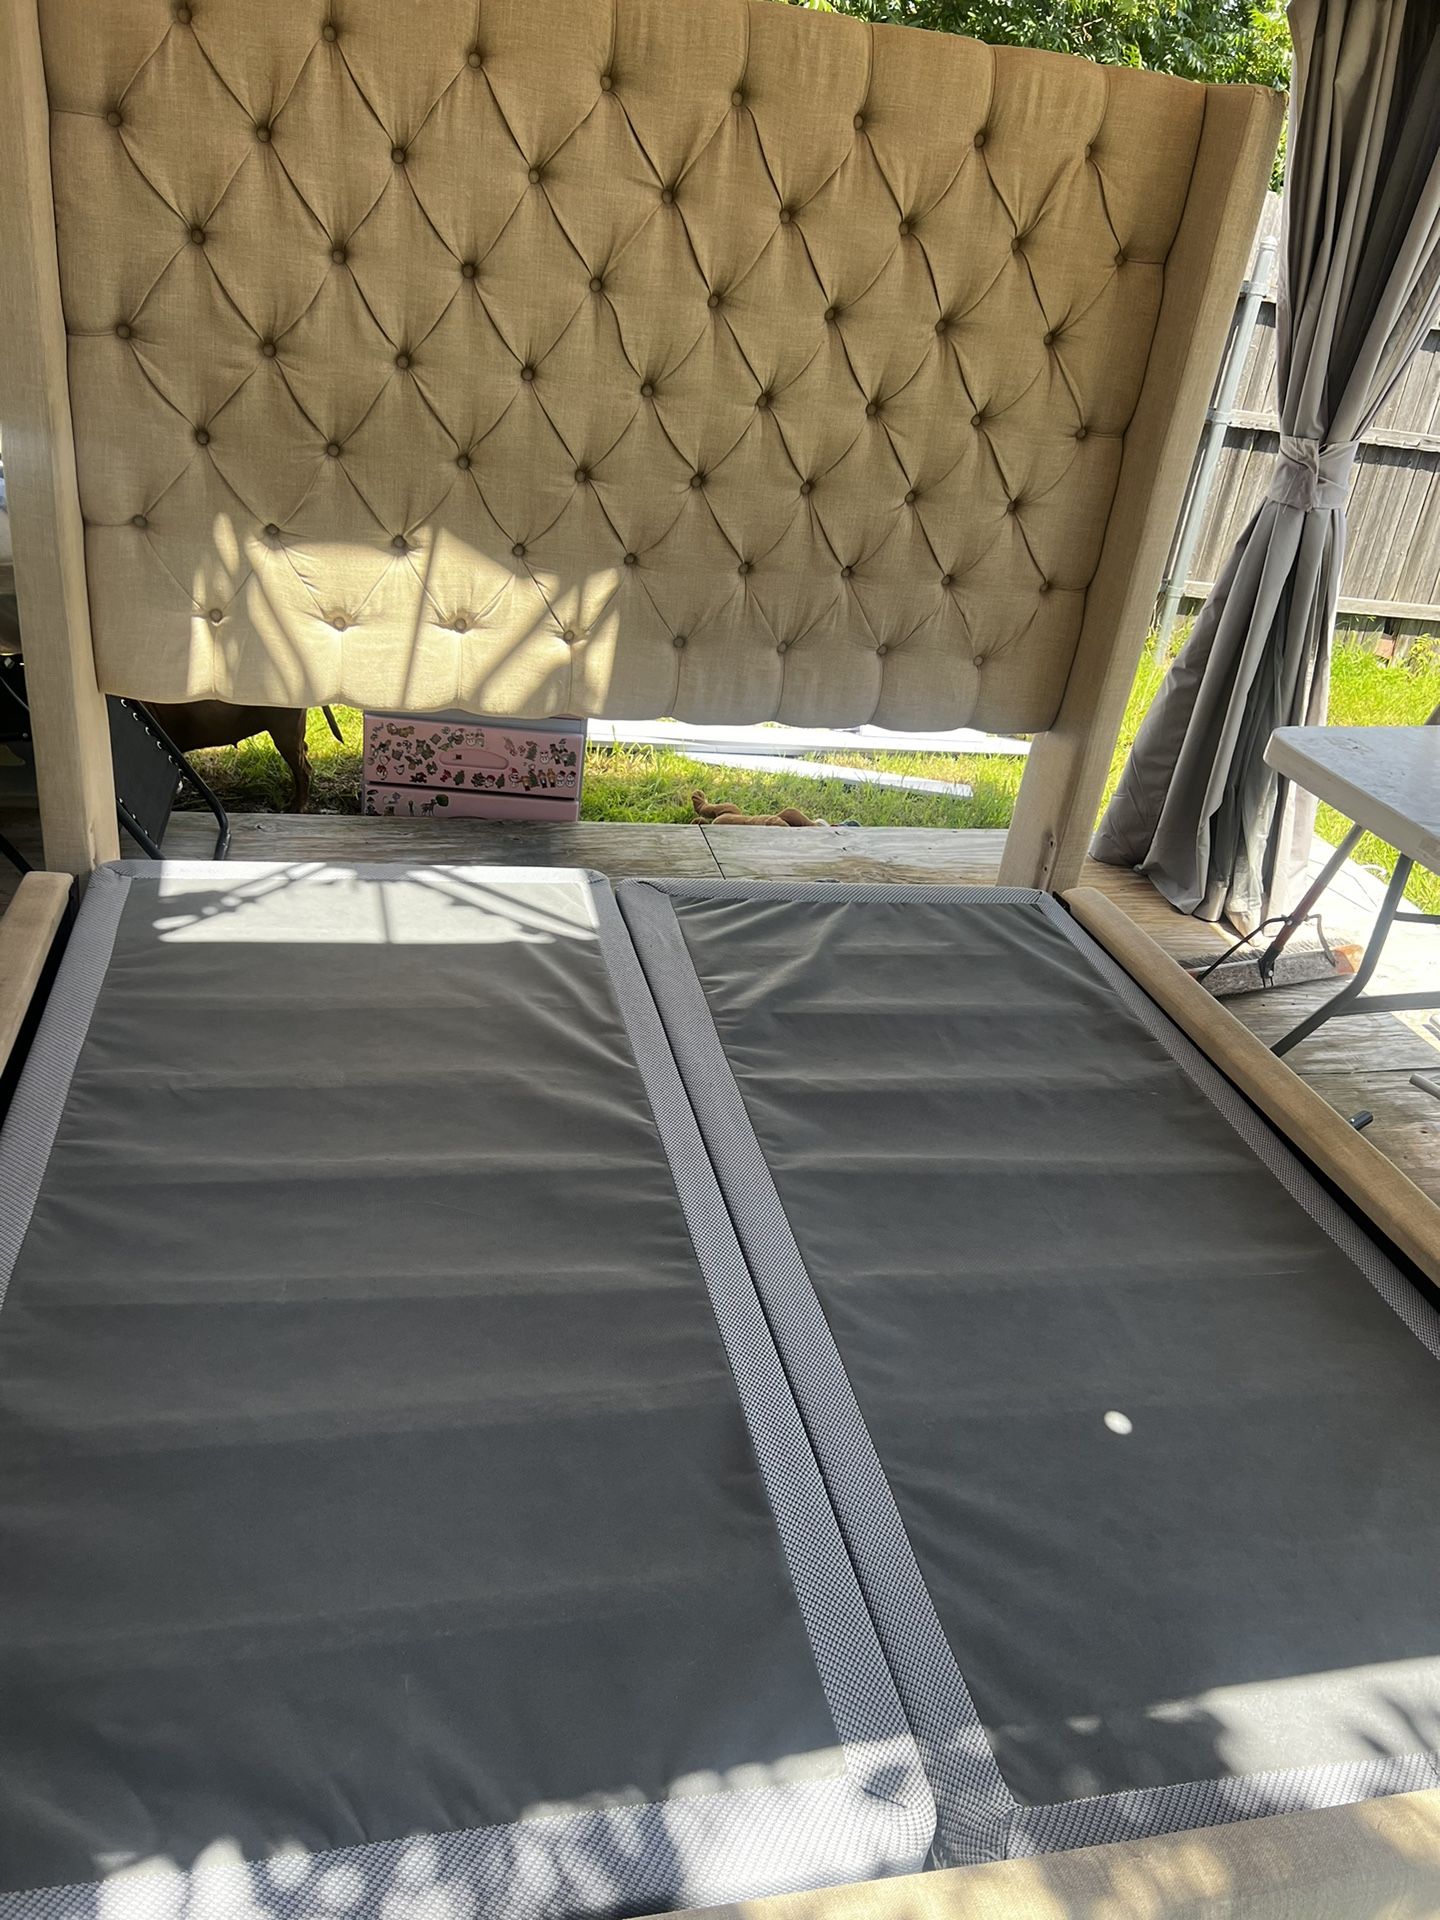 King Bed frame ,box springs And Mattress 